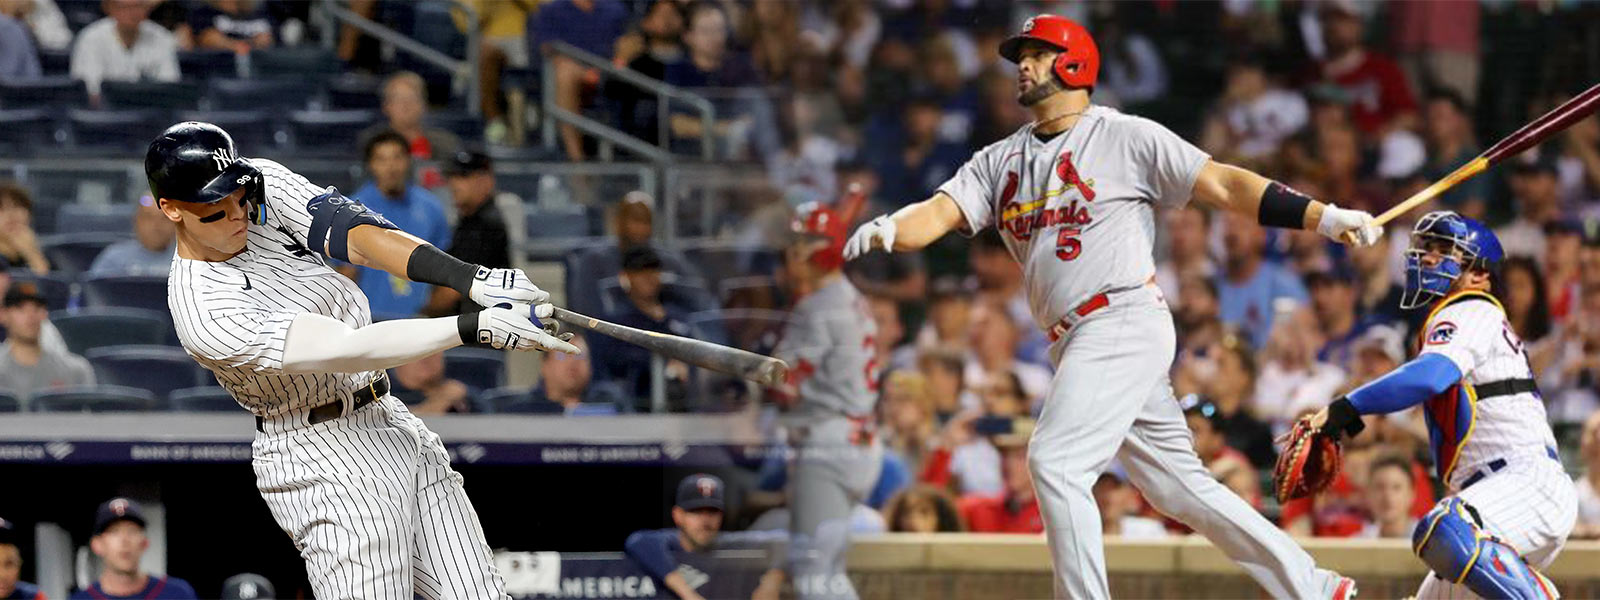 ​Judge and Pujols: Two Sluggers Chasing Records and Milestones as the Season Draws to a Close